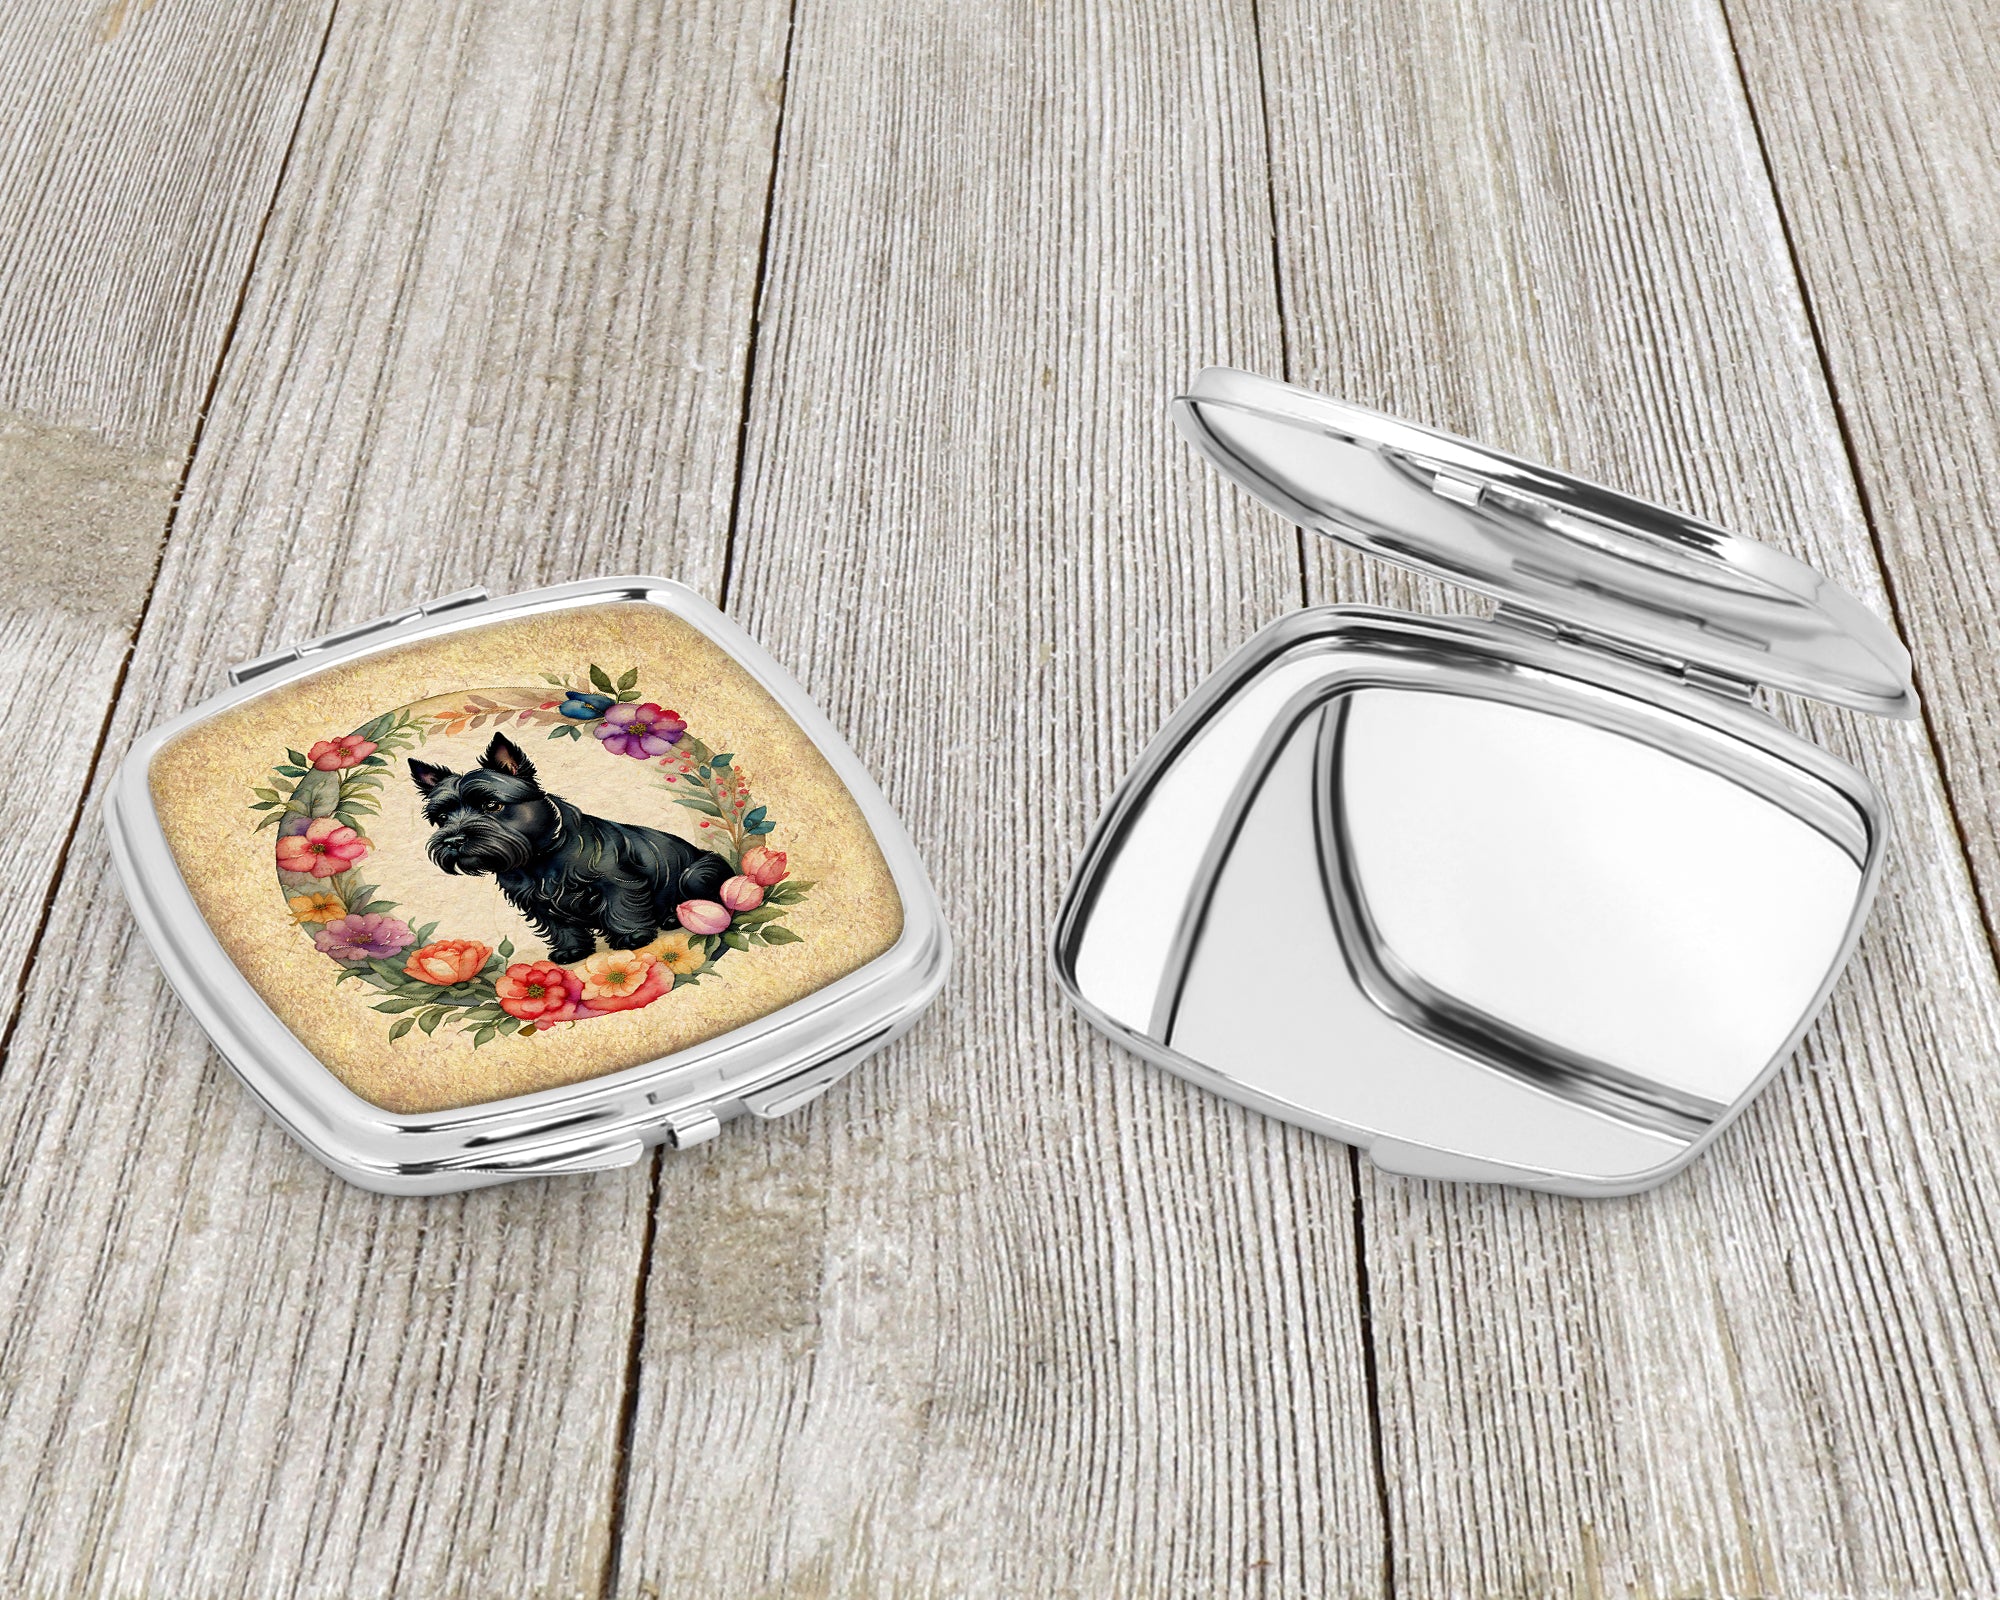 Scottish Terrier and Flowers Compact Mirror